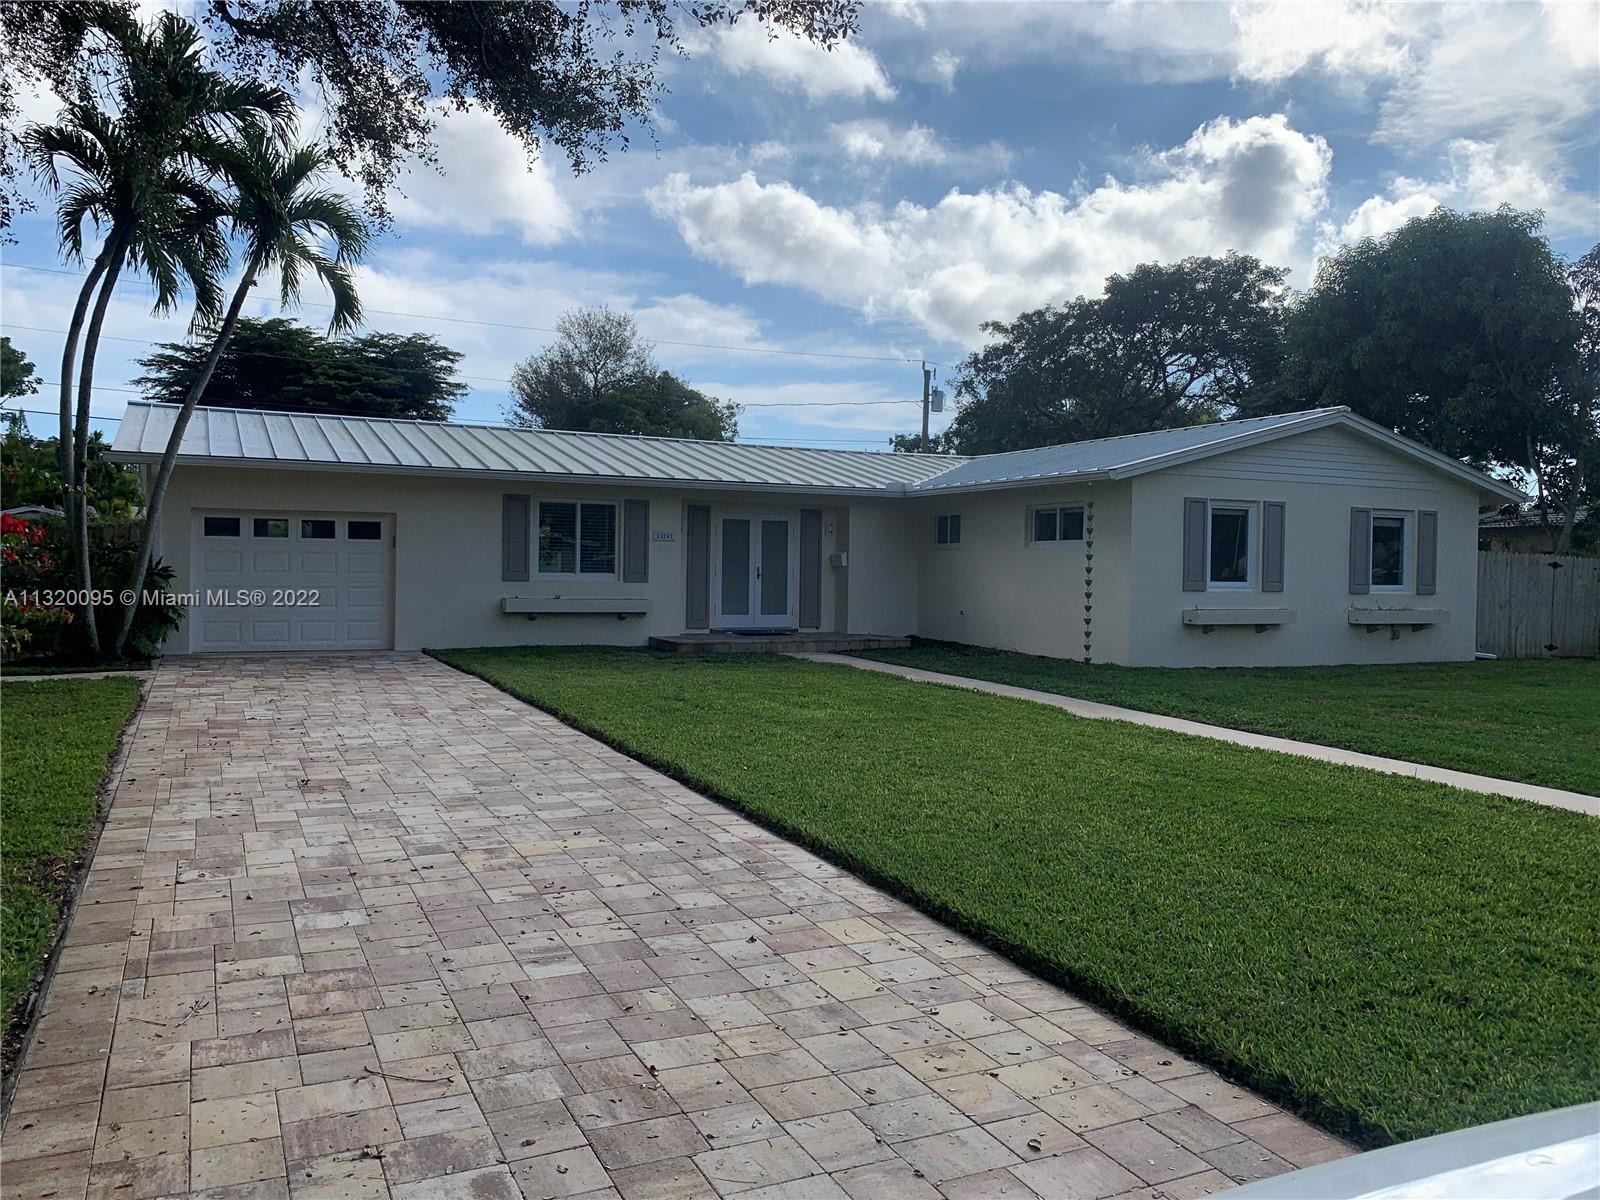 4/2 in Palmetto bay available for immediate occupancy. Tile and wood flooring, just renovated bathrooms, closet systems, pool, large backyard, large patio. Pool and lawn maintenance included. Great location, great schools, close to parks, shopping, restaurants.